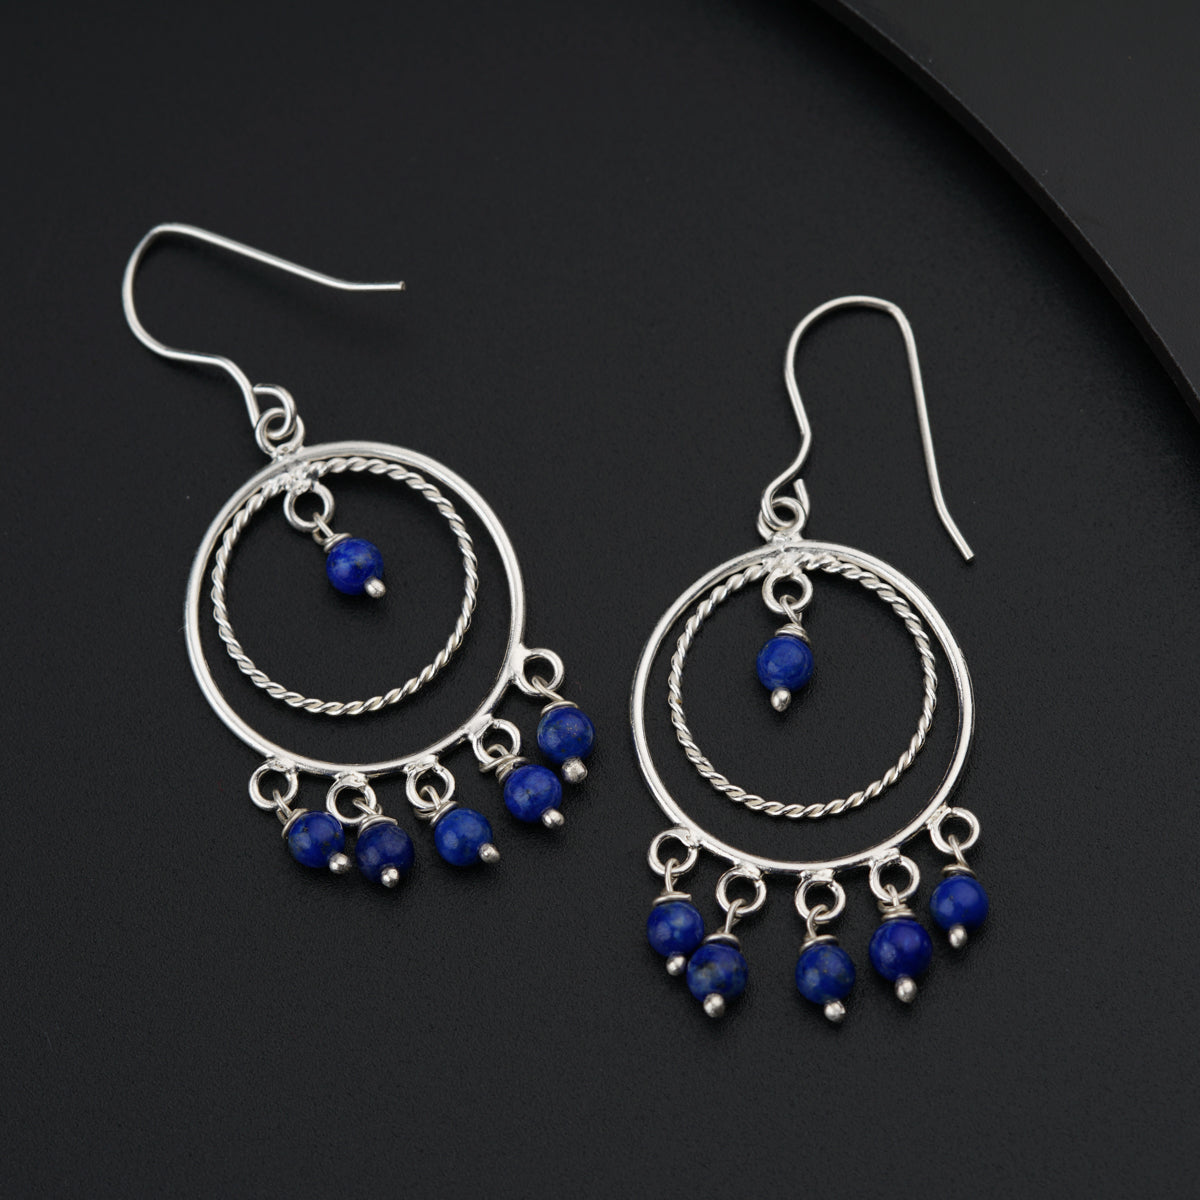 a pair of blue beads hanging from a pair of silver hoop earrings